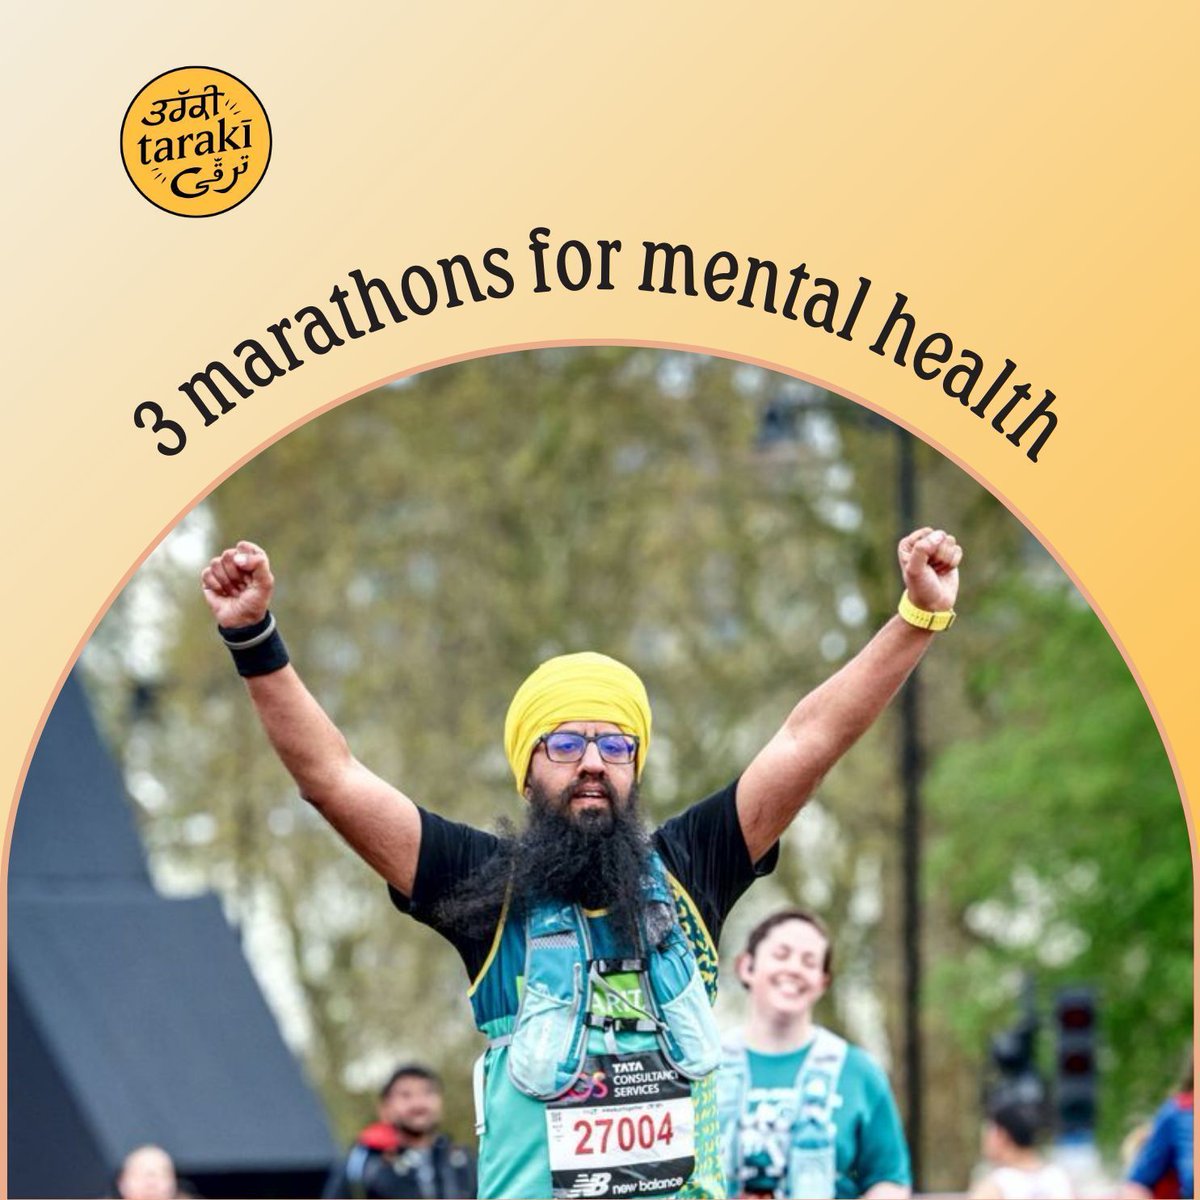 the time has come, and @sikhdad's first marathon is just around the corner! ☀️ over the next month, gurpreet singh will be running 3 marathons fundraising for taraki's new Youth Mental Health Innovation Fund. to learn more follow the link below! ✨ gofundme.com/f/gsmarathon3